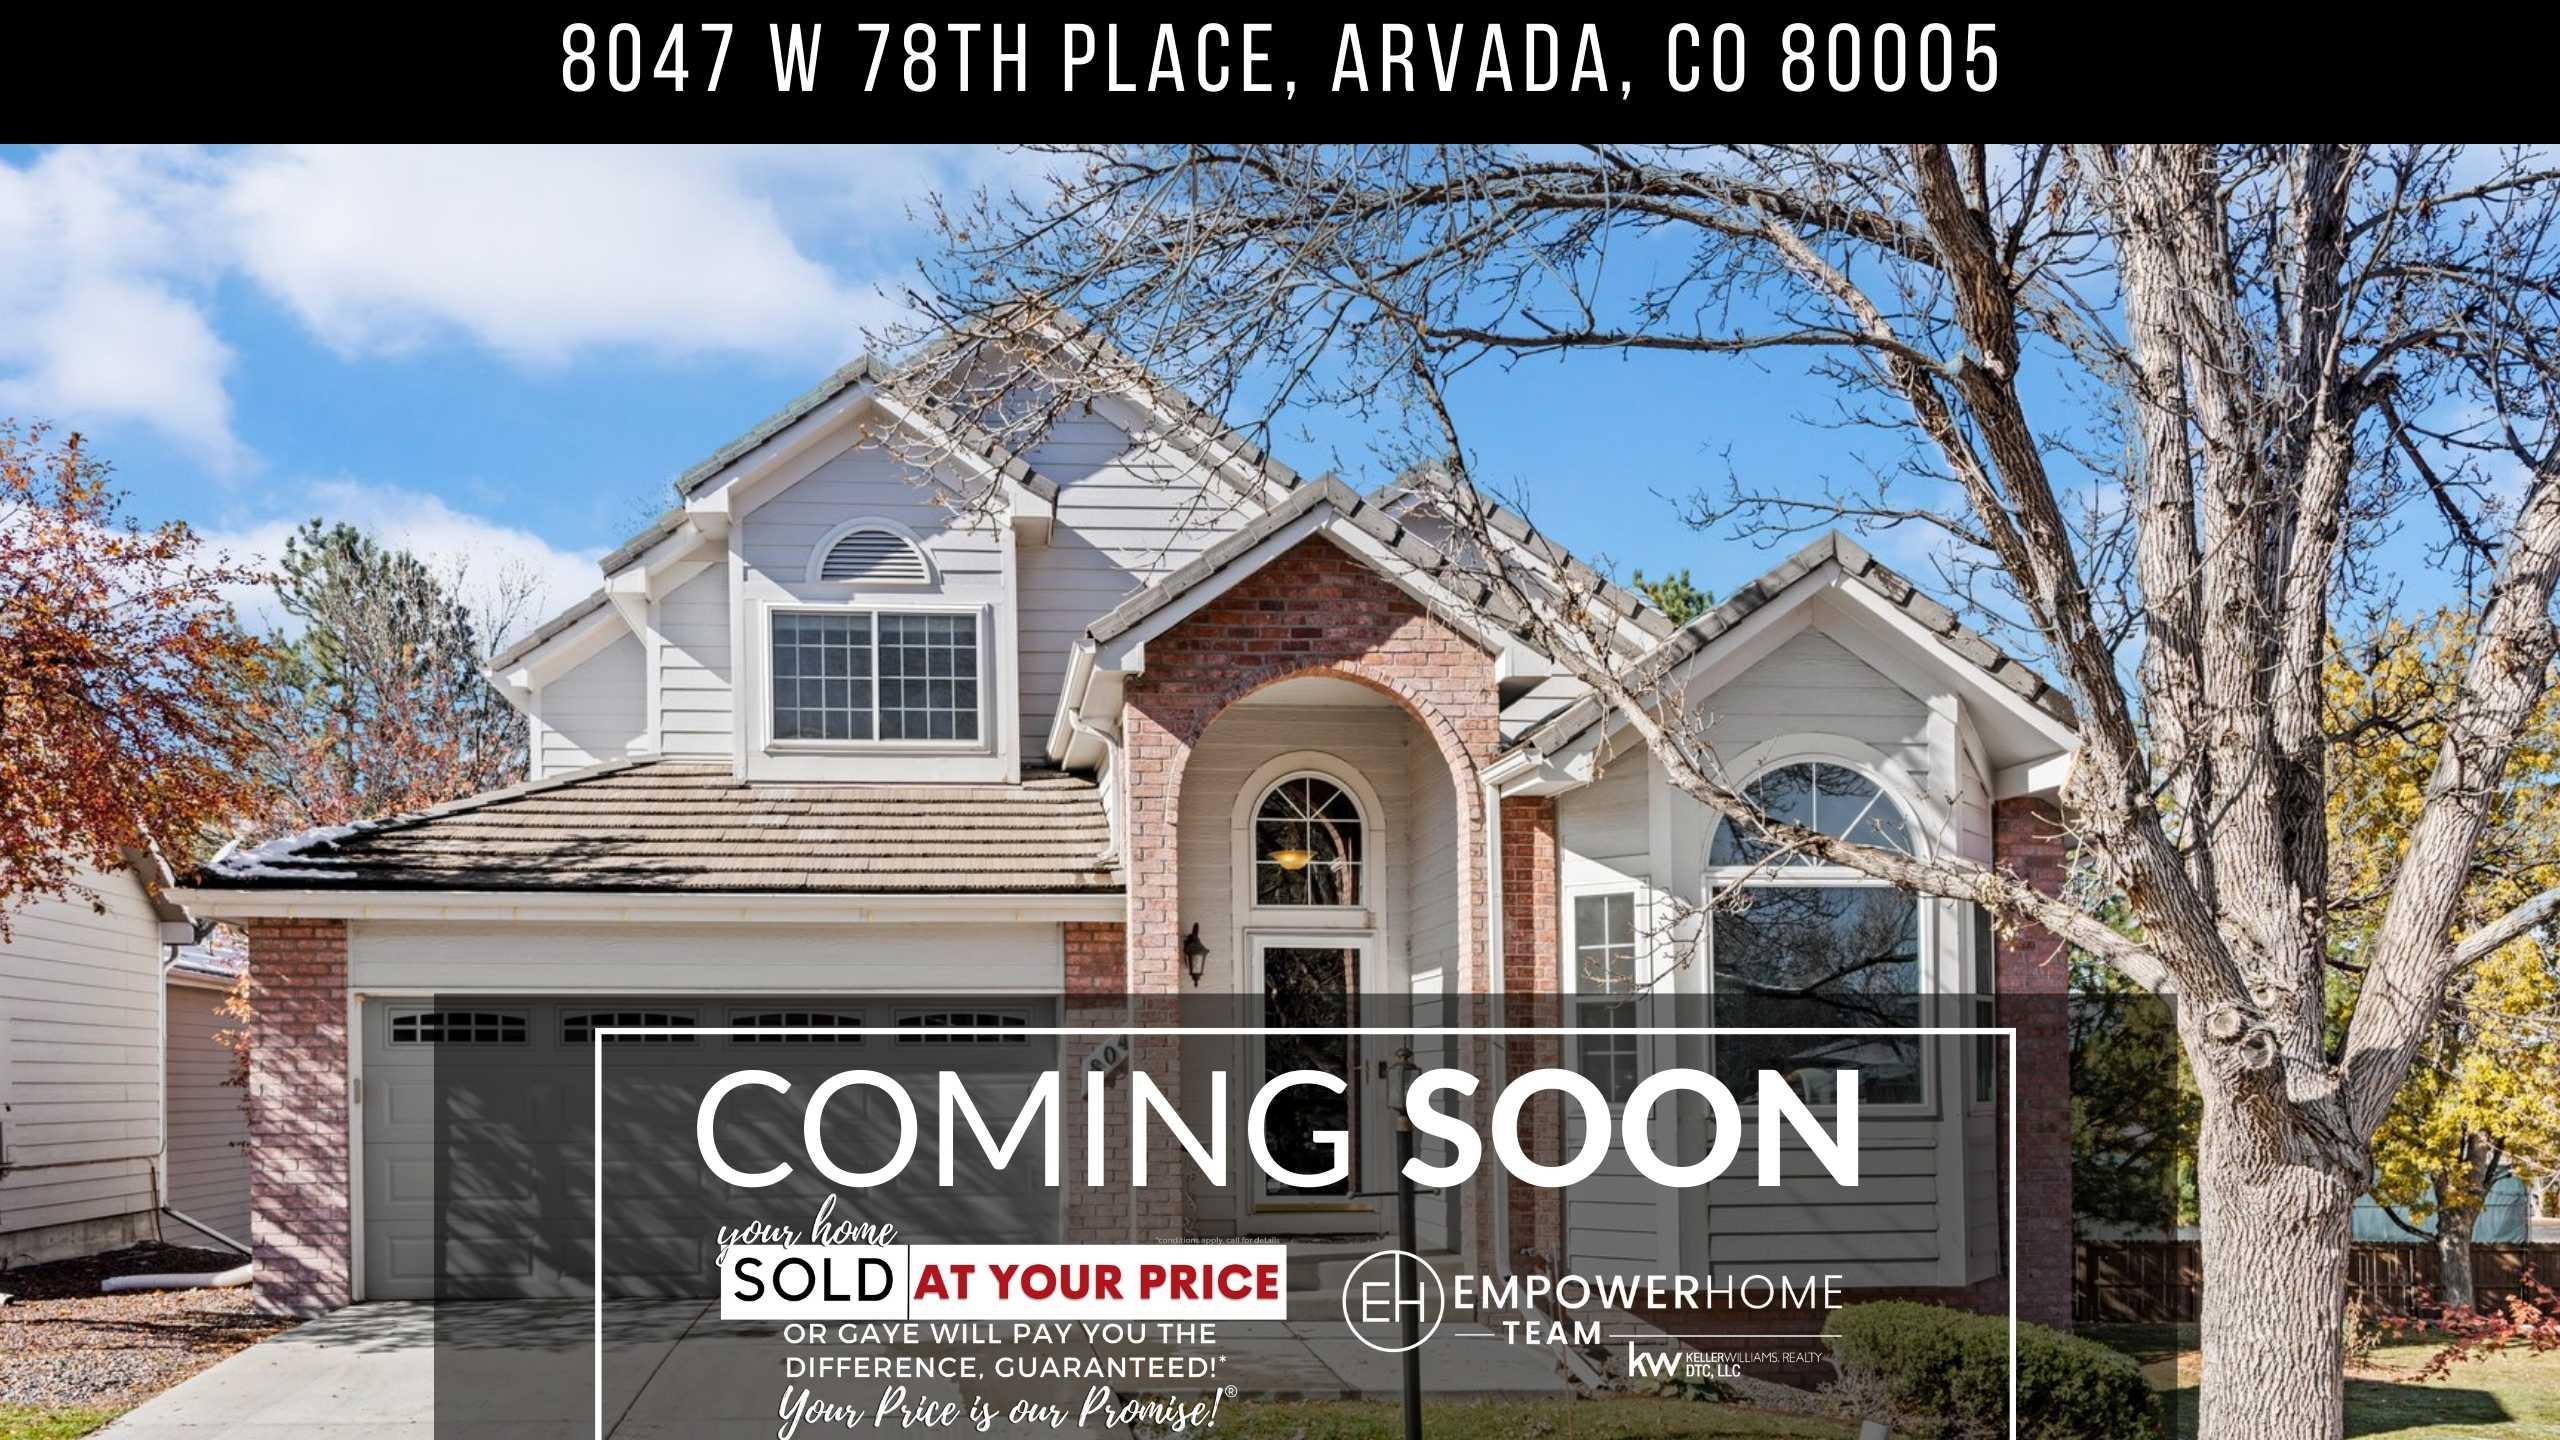 8047 W 78th Place, Arvada, CO 80005